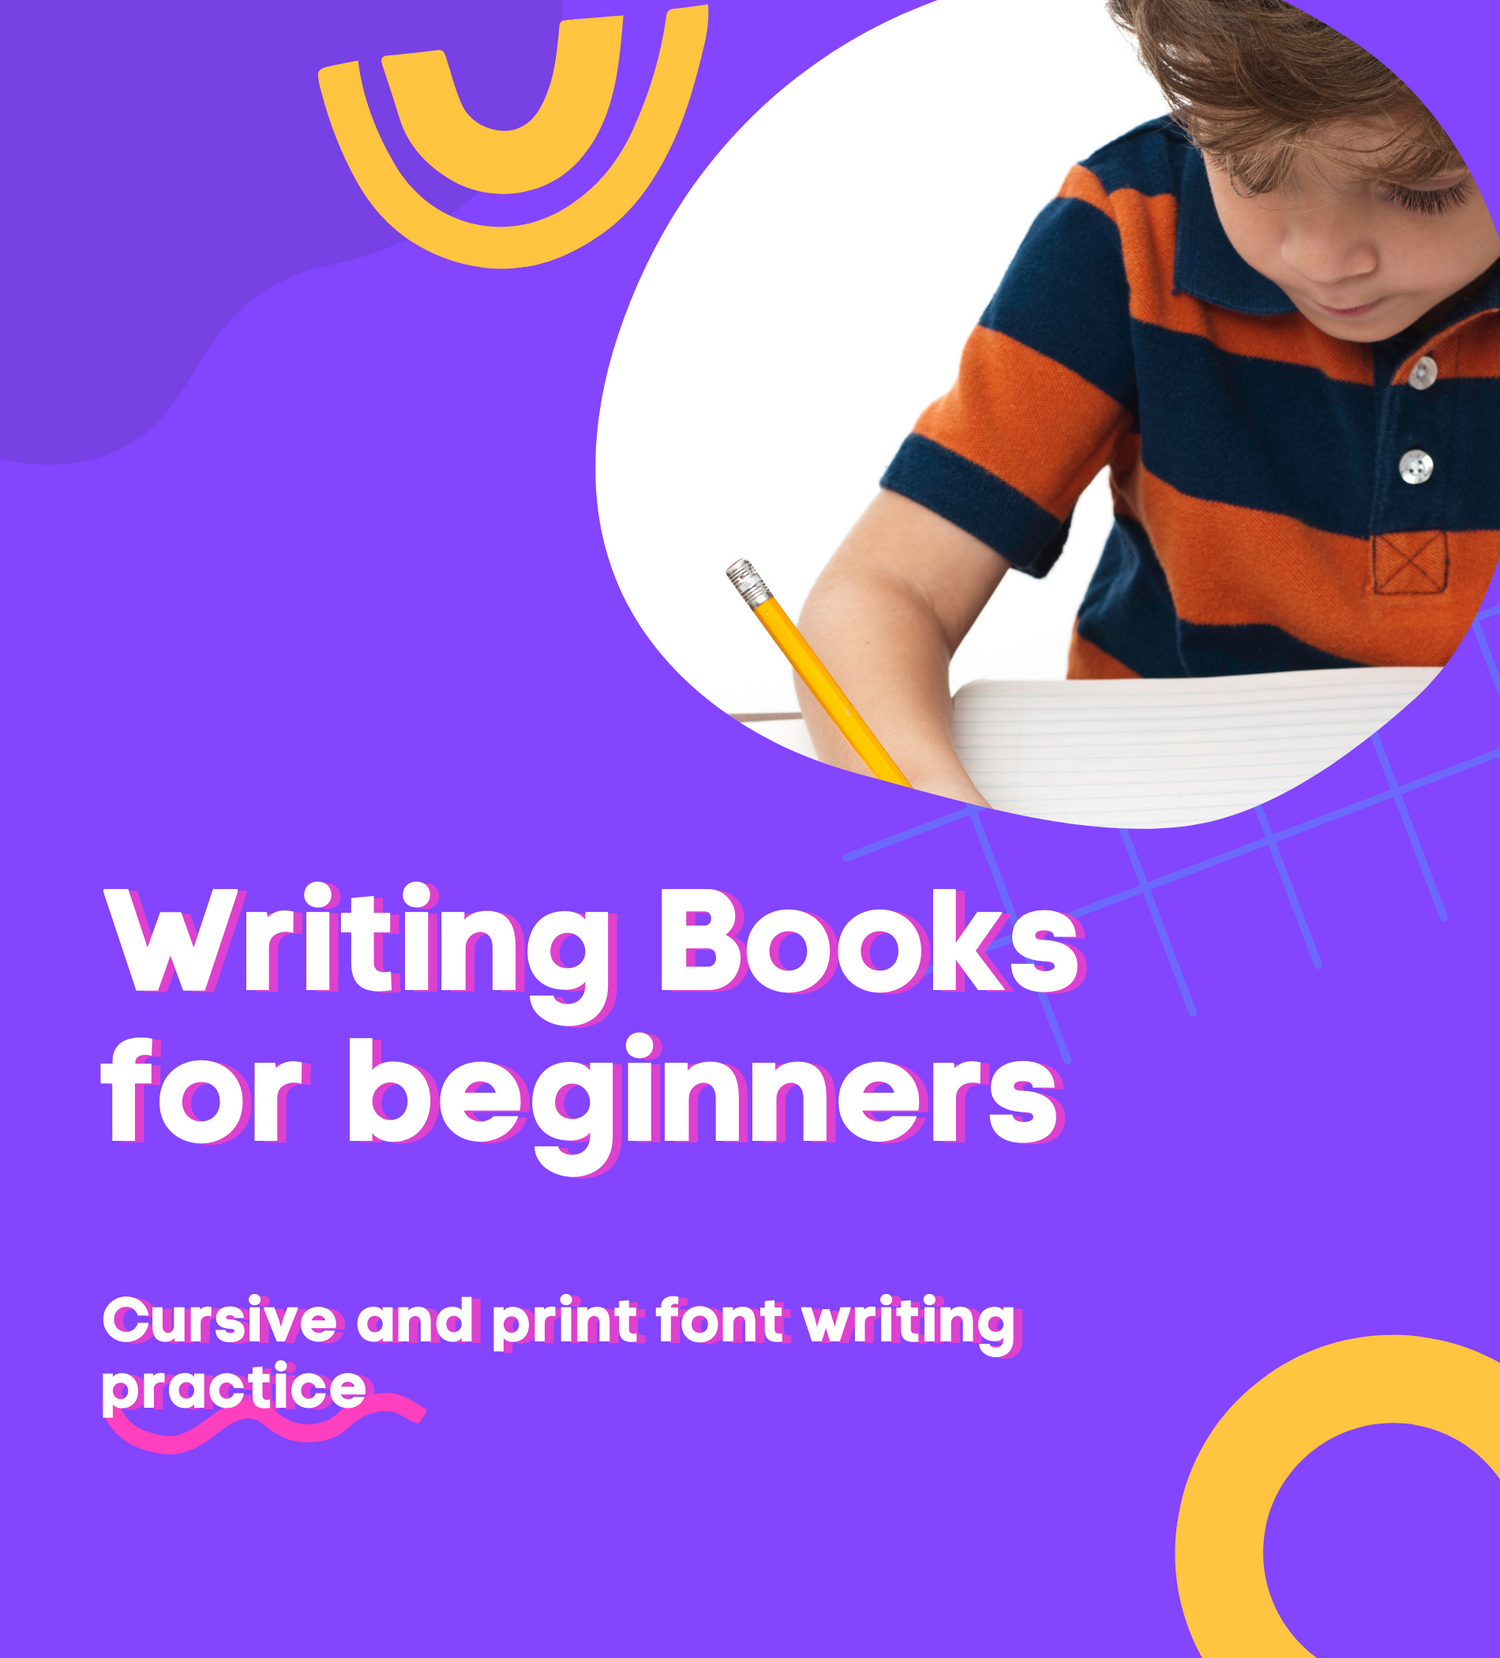 Writing Books for Beginners